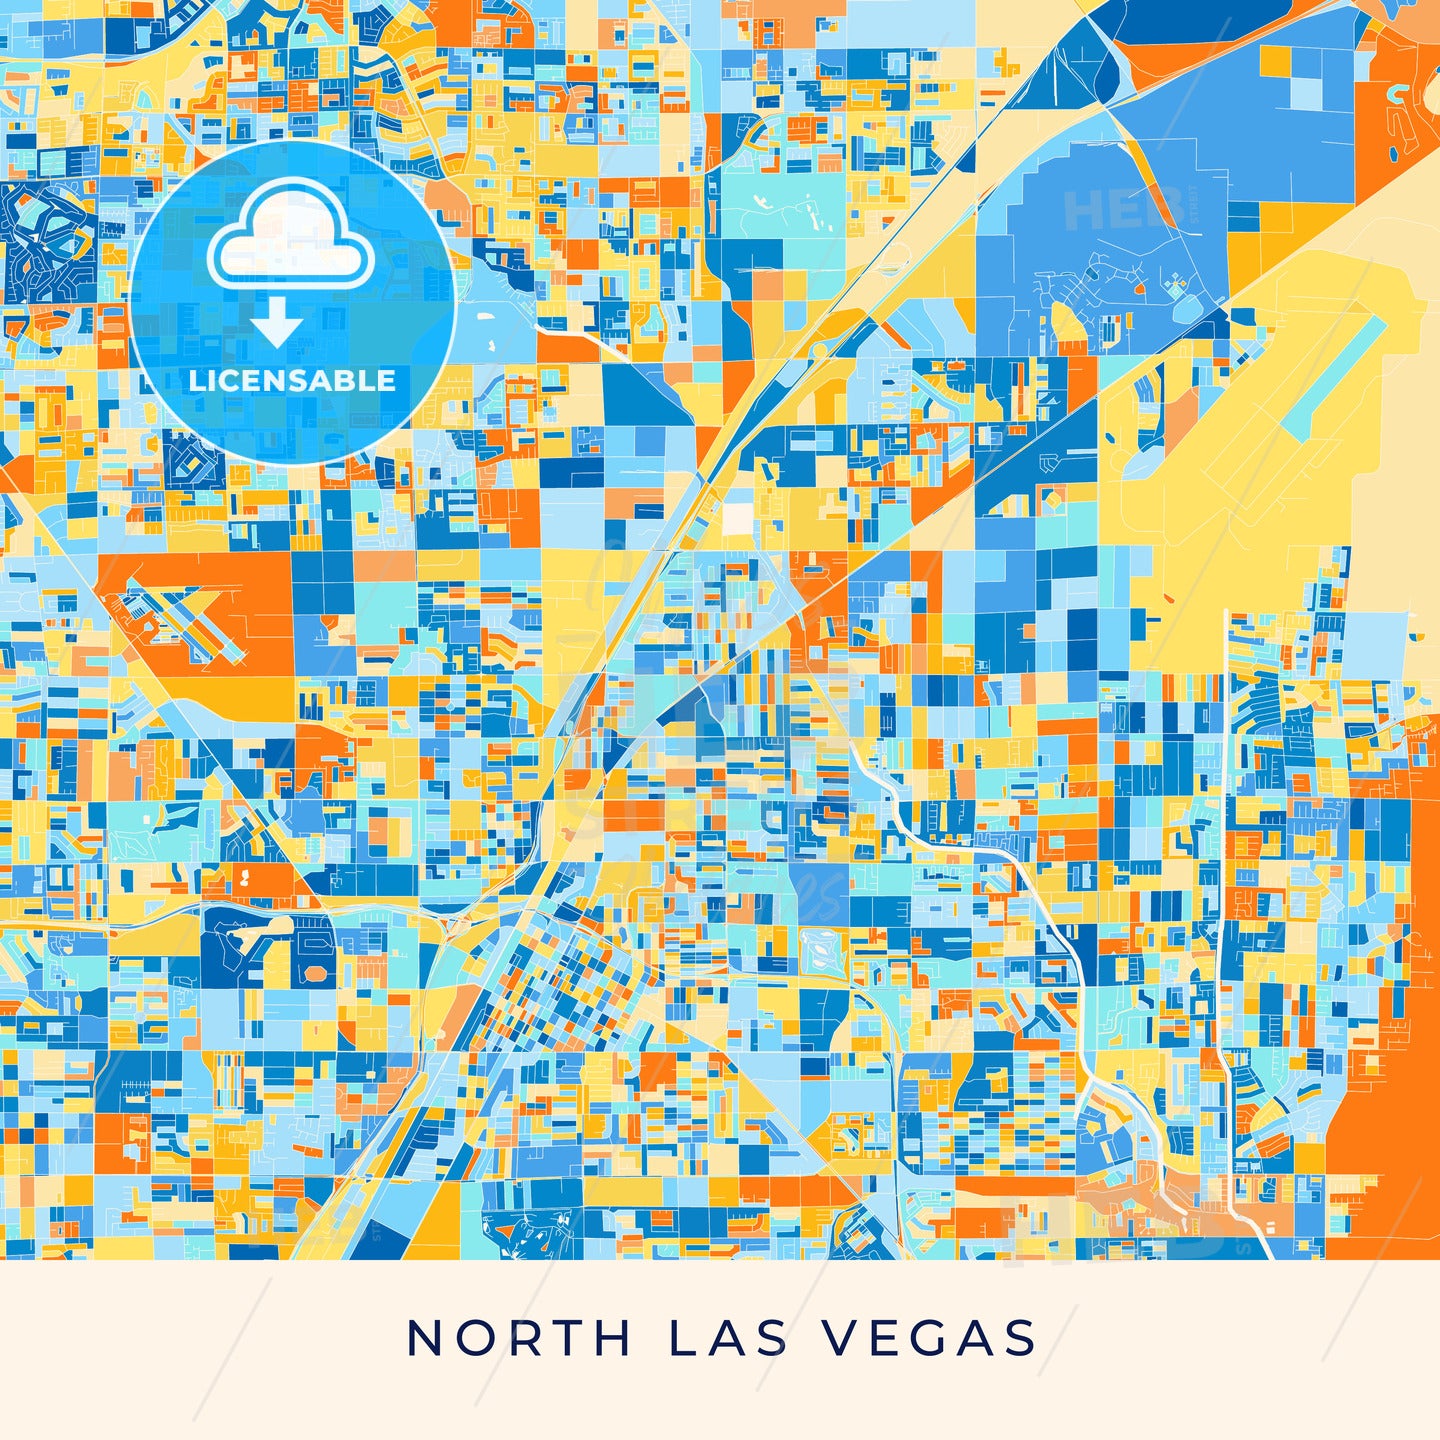 North Las Vegas colorful map poster template